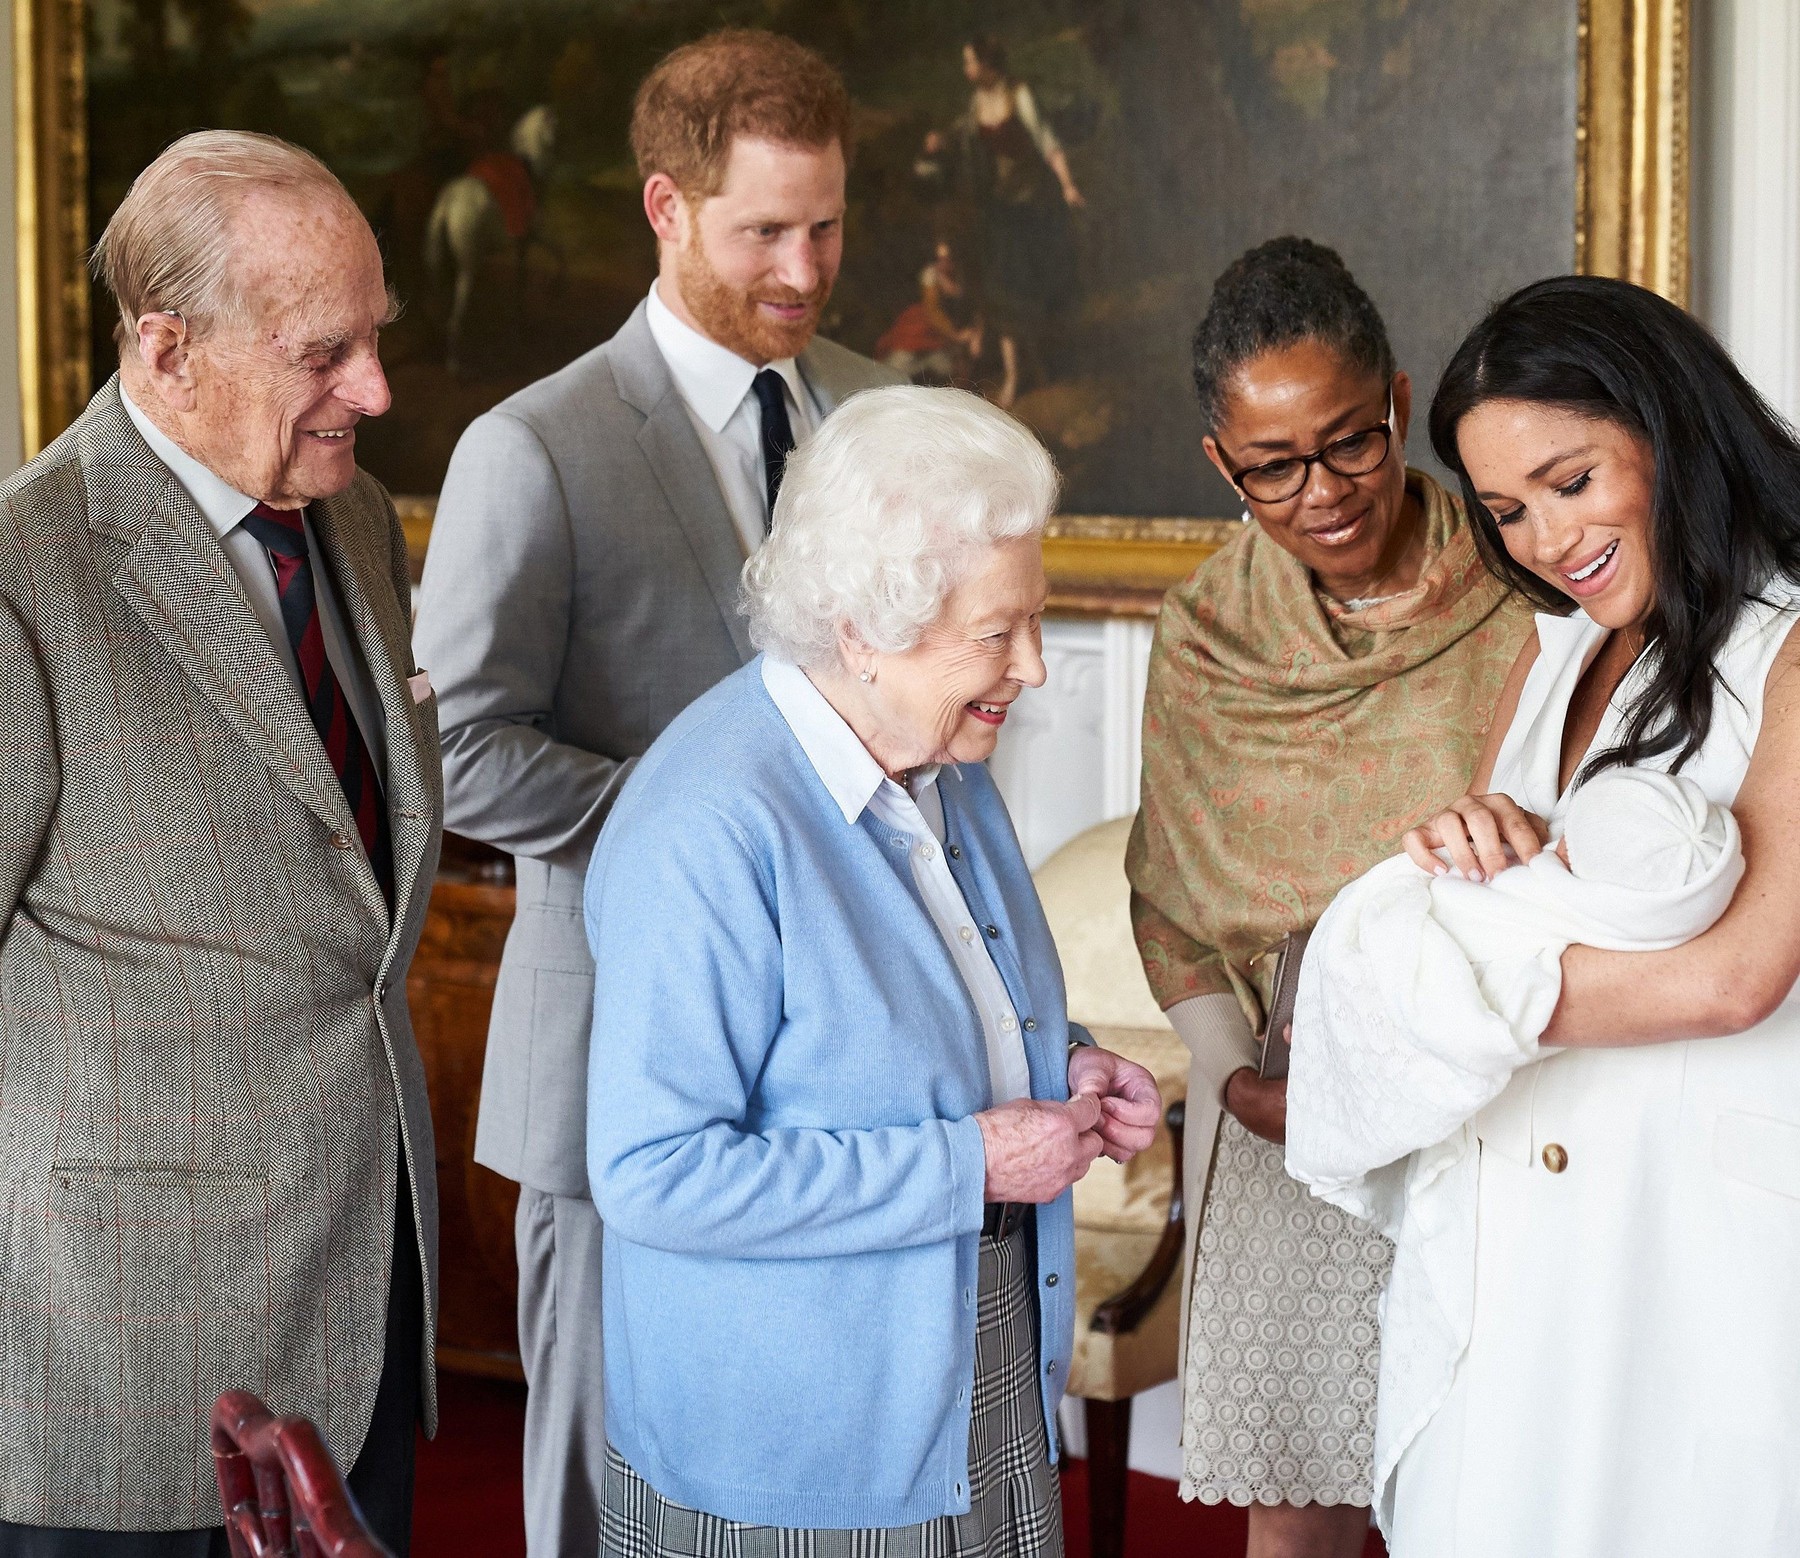 Prince Harry, Duke of Sussex, and Meghan Markle, Duchess of Sussex are joined by The Queen, The Duke of Edinburgh and Doria Ragland, as they present their baby son Archie to the World at Windsor Castle, Windsor, Berkshire, UK, on the 8th May 2019.

Picture by Chris Allerton/SussexRoyal

STRICTLY EDITORIAL USE ONLY.
08 May 2019,Image: 431891163, License: Rights-managed, Restrictions: NO United Kingdom, Model Release: no, Credit line: MEGA / The Mega Agency / Profimedia